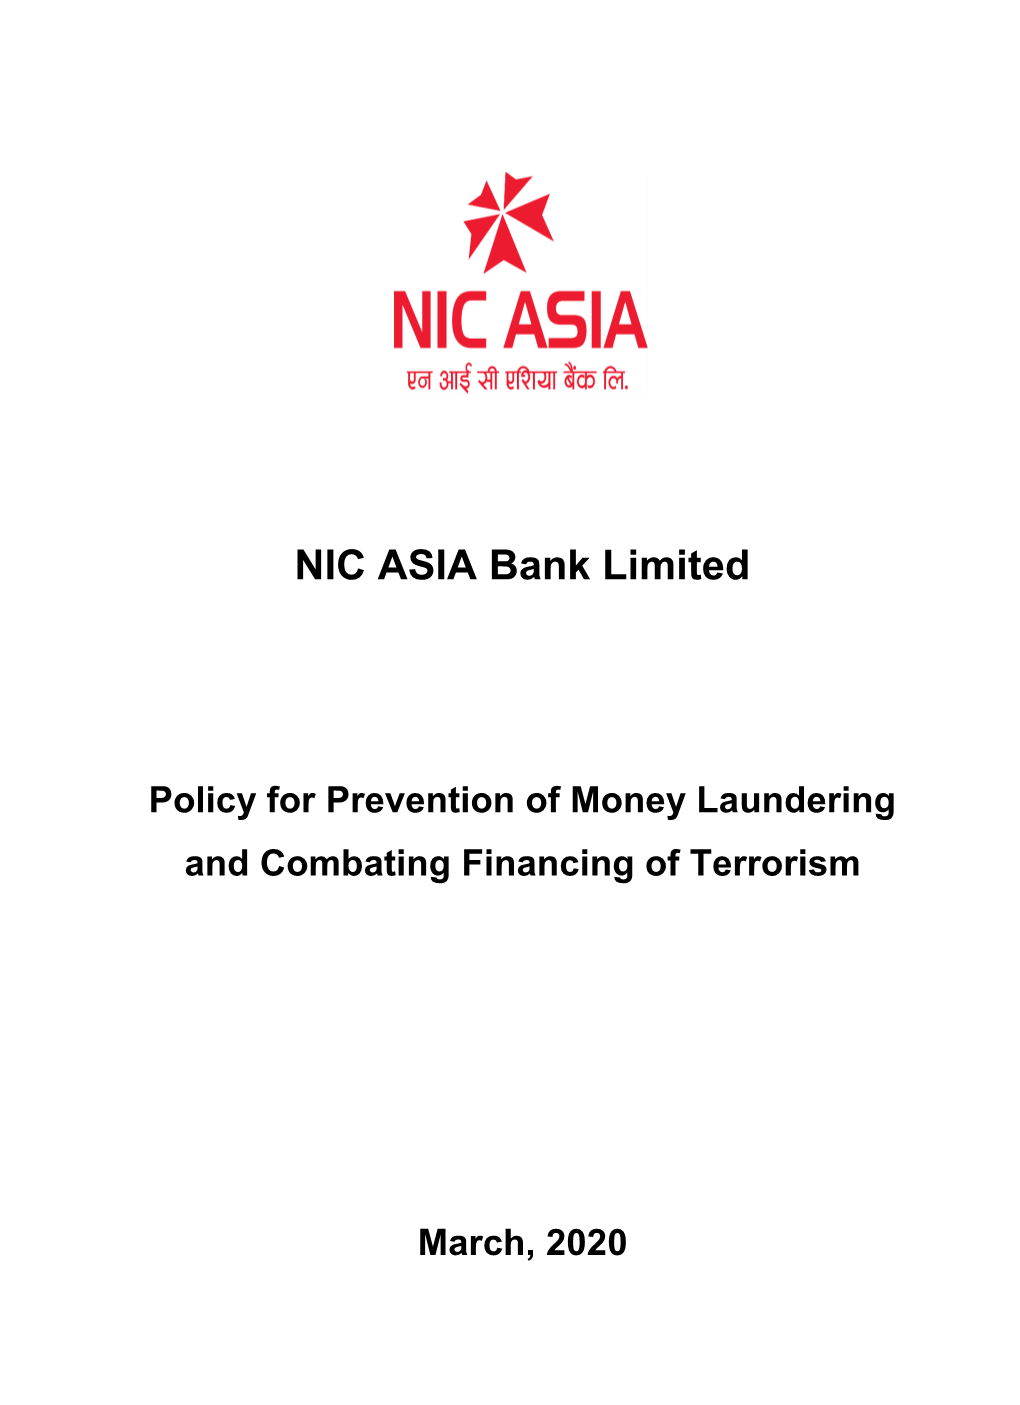 Policy for Prevention of Money Laundering & Combating The